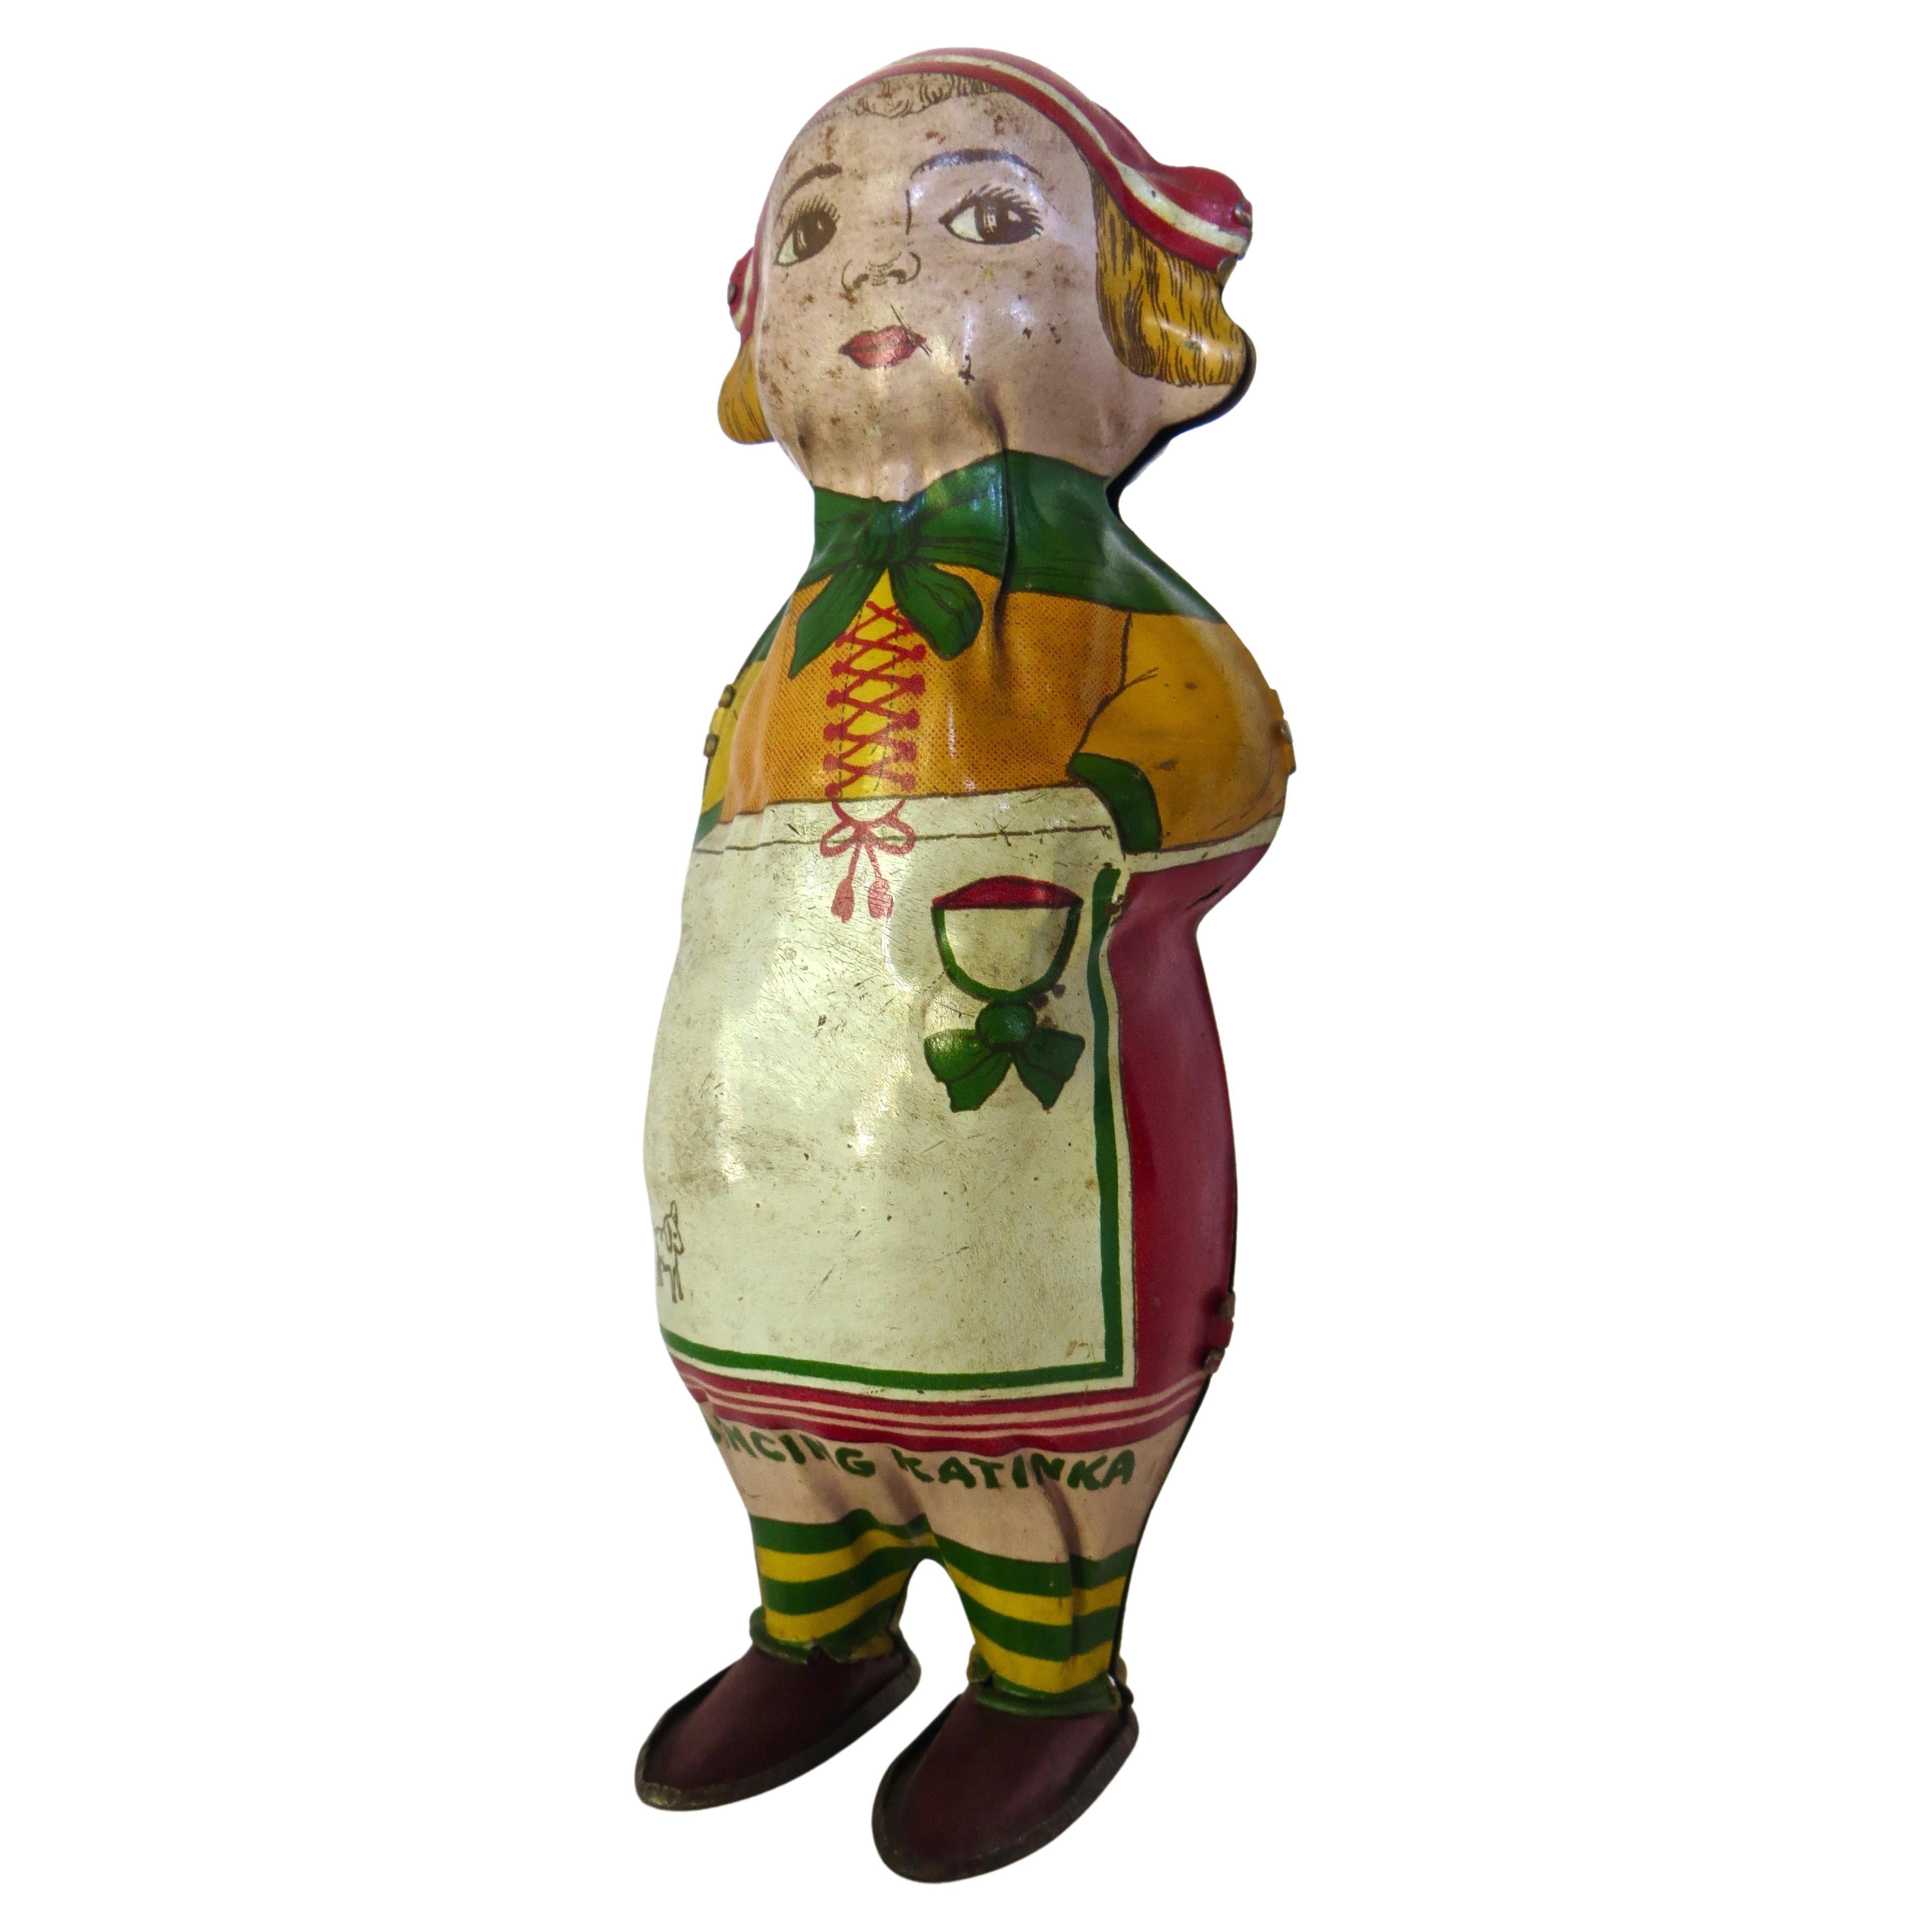 Vintage Tin Wind Up Toy by Lindstrom, "Dancing Katinka" American, Circa 1930 For Sale